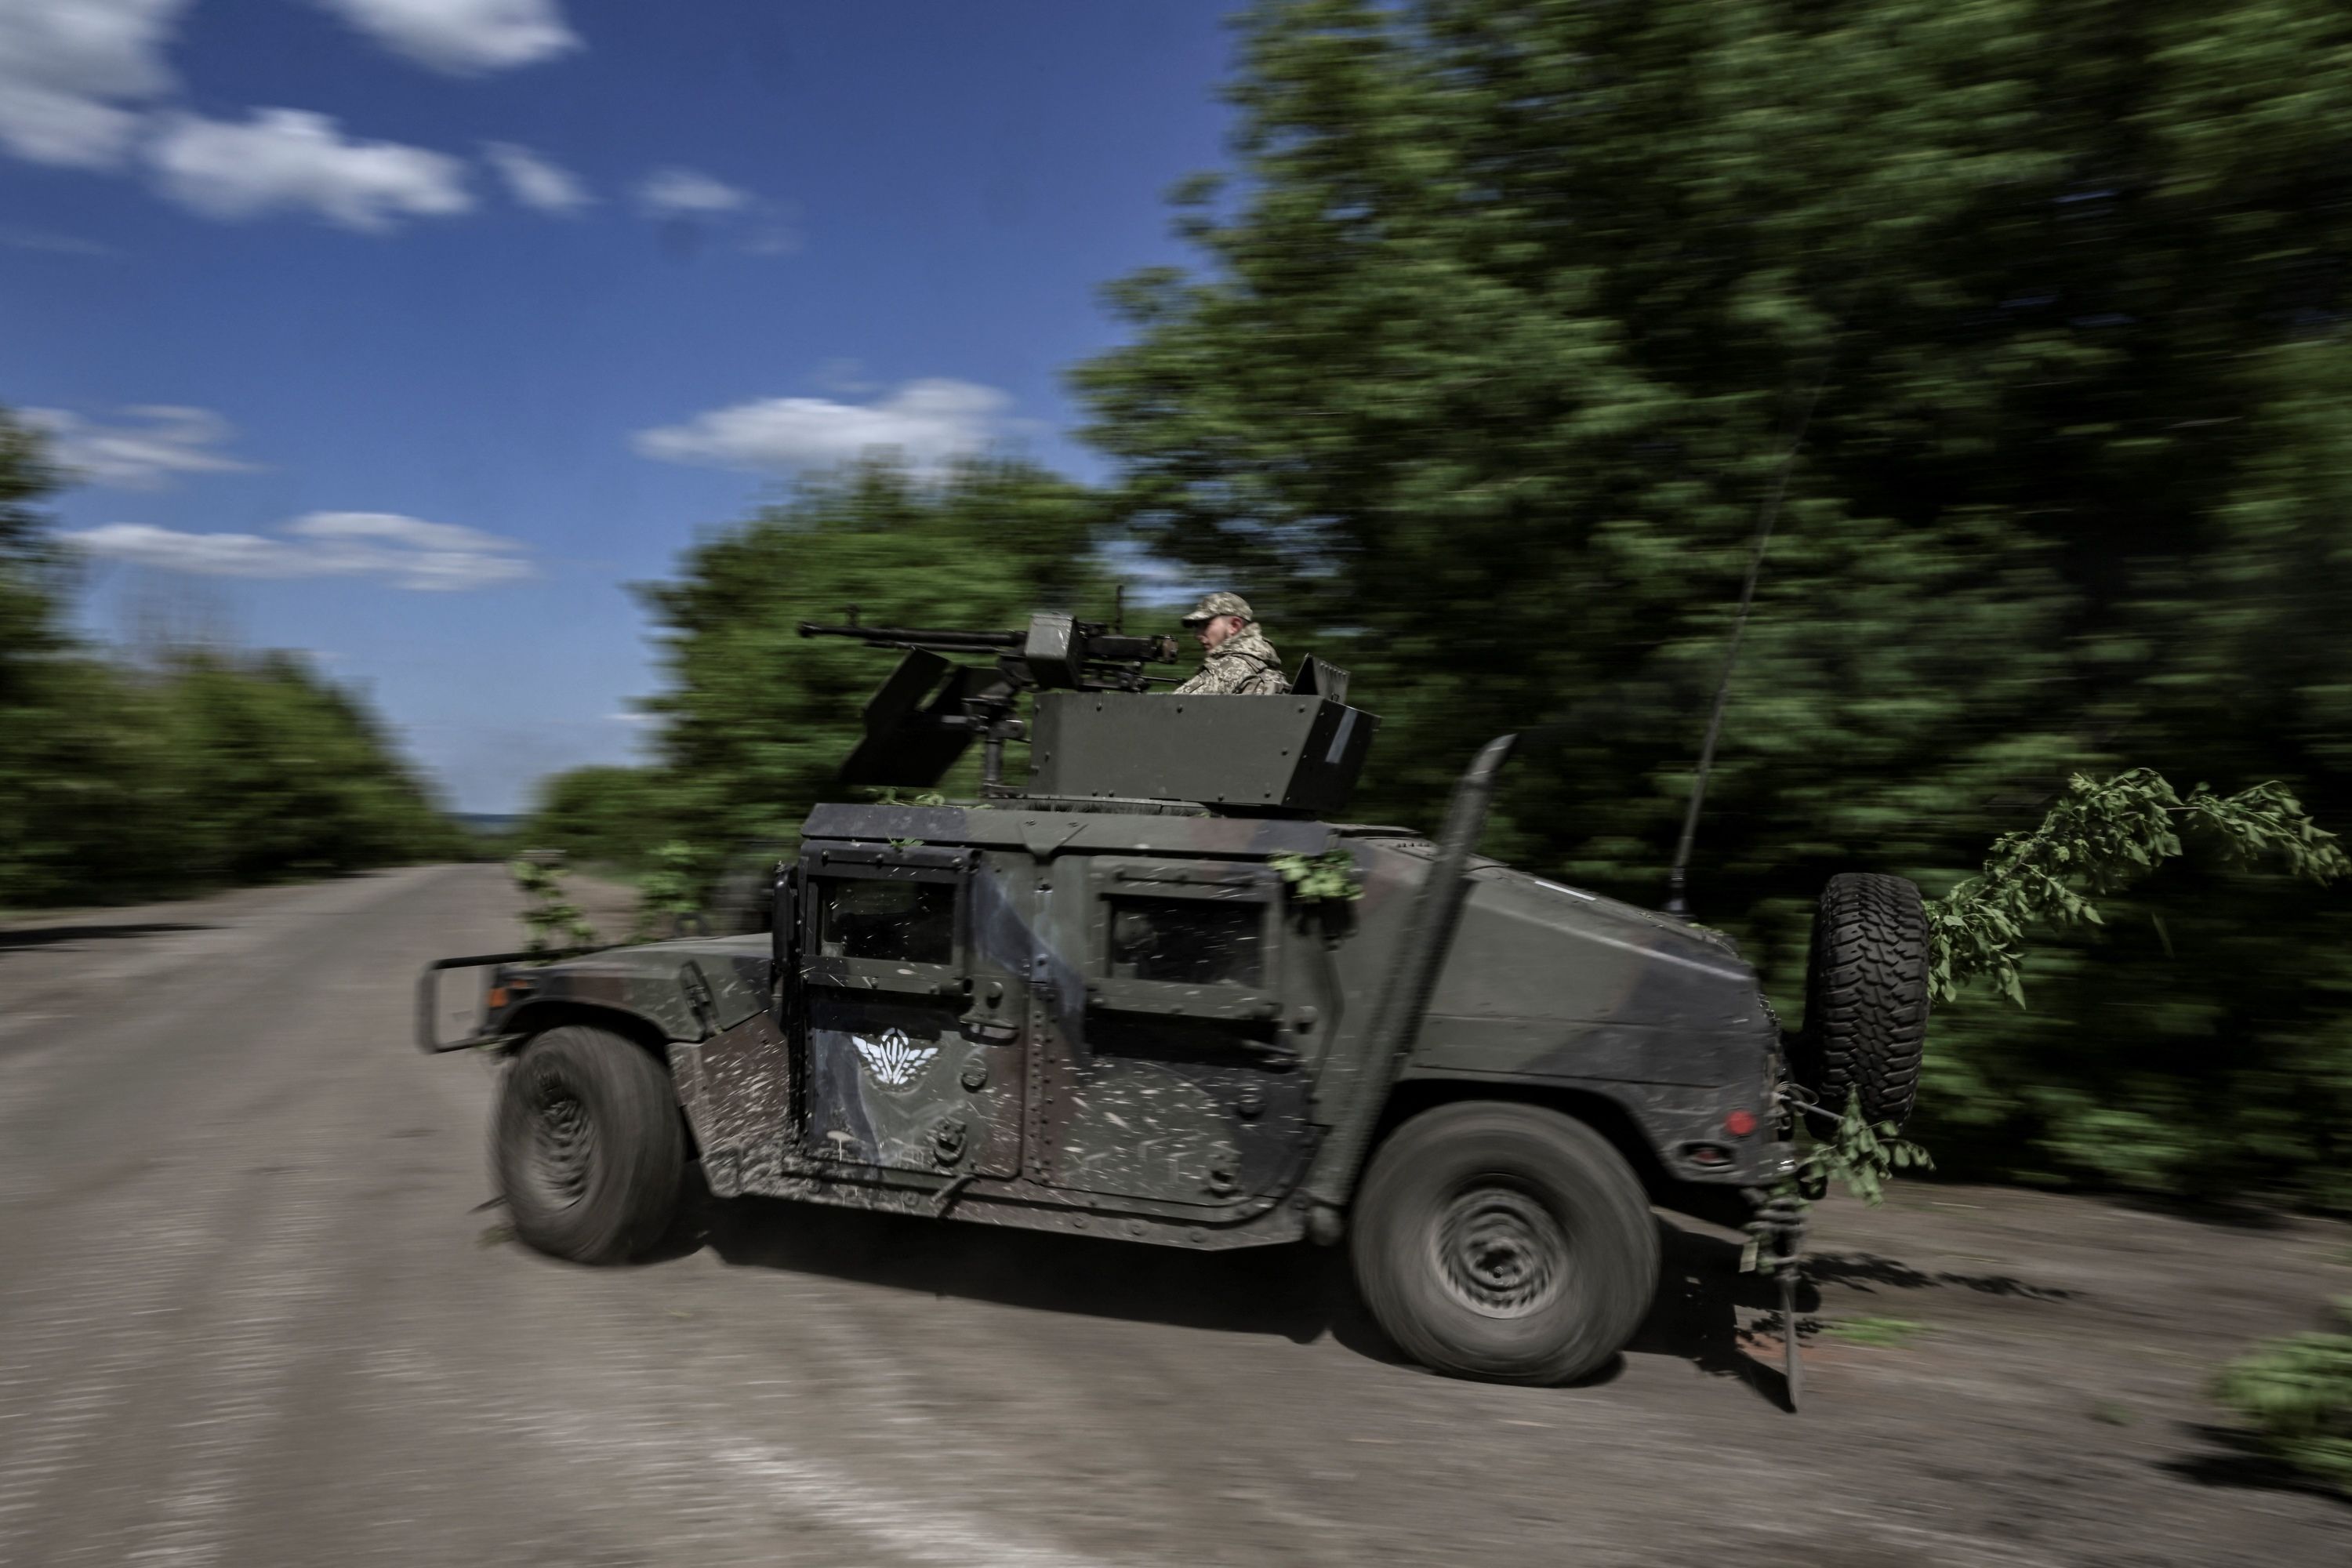 Ukrainian servicemen move toward the frontline at a checkpoint near the city of Lysychansk in the eastern Ukranian region of Donbas, on May 23.